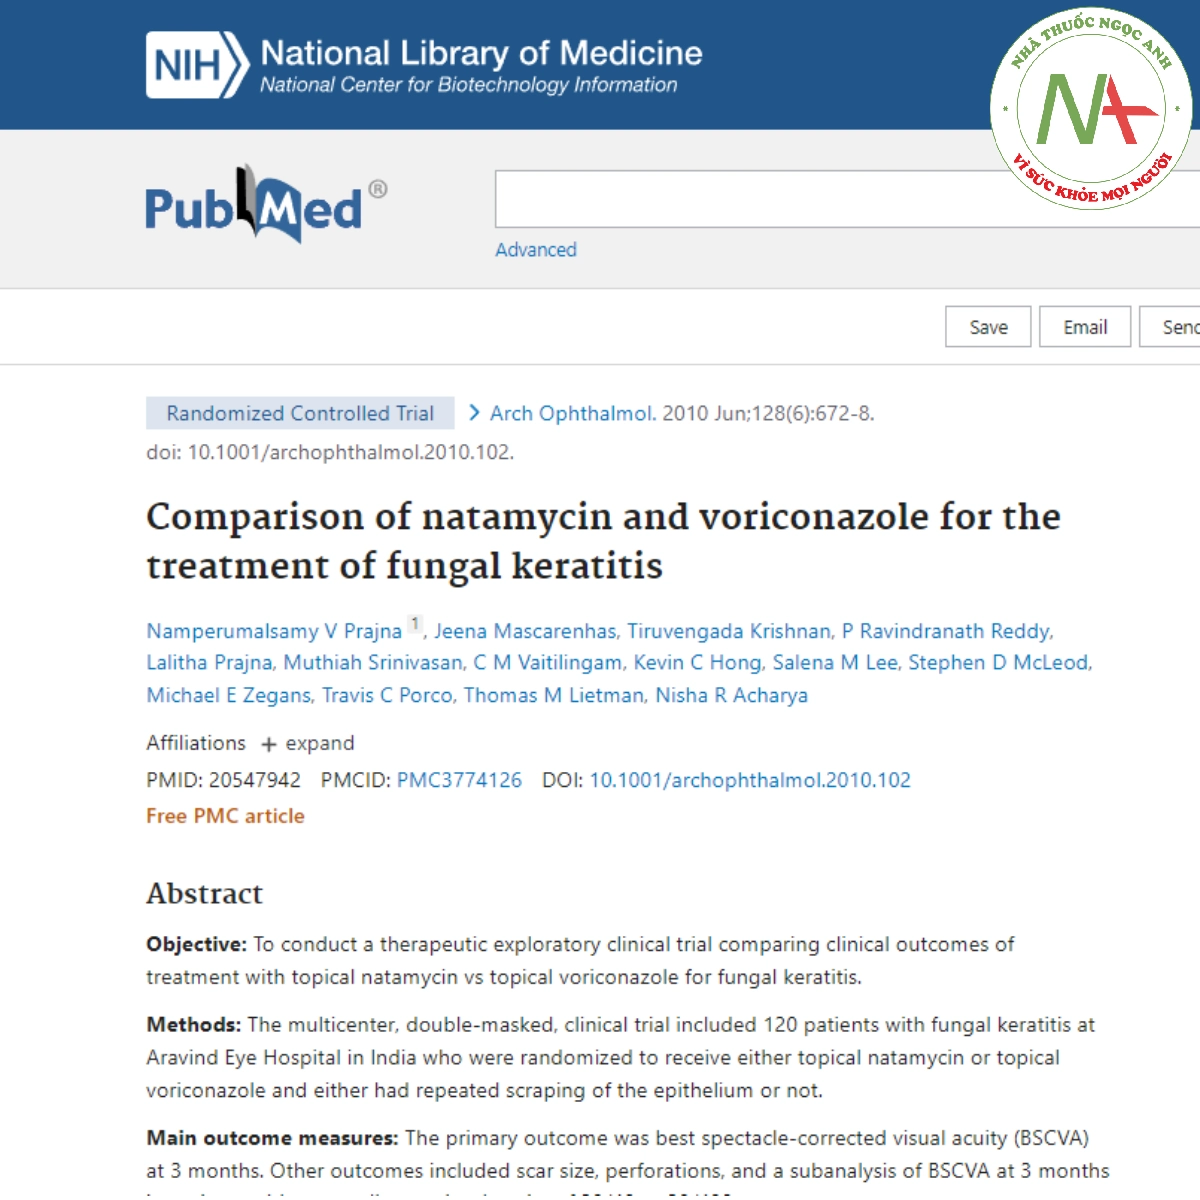 Comparison of natamycin and voriconazole for the treatment of fungal keratitis